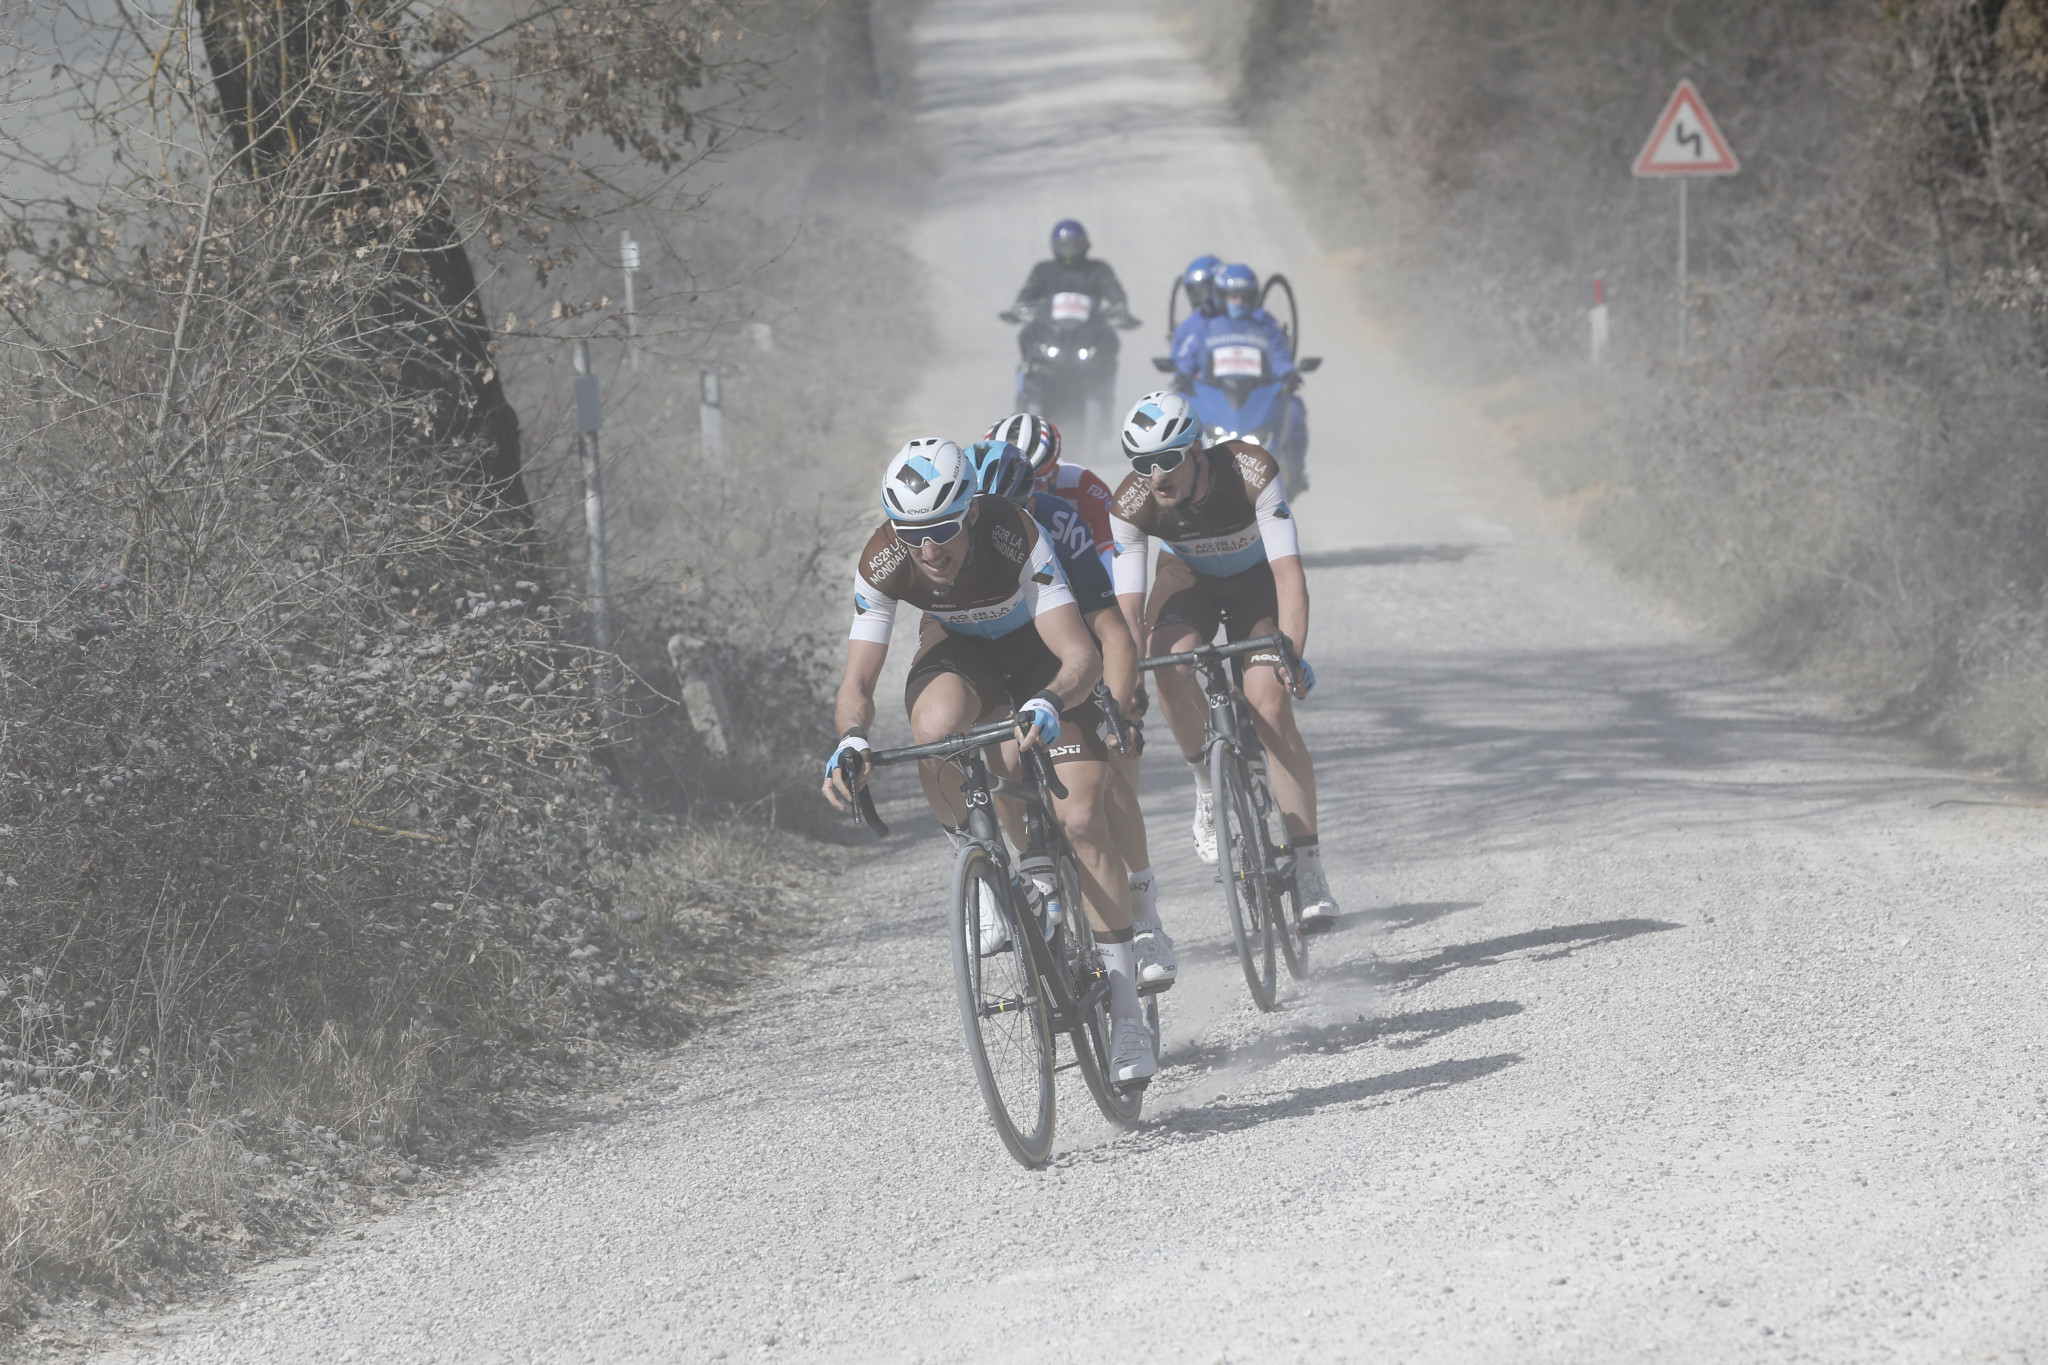 Tomorrow's Strade Bianche is one of three major cycling events to be postponed ©Getty Images